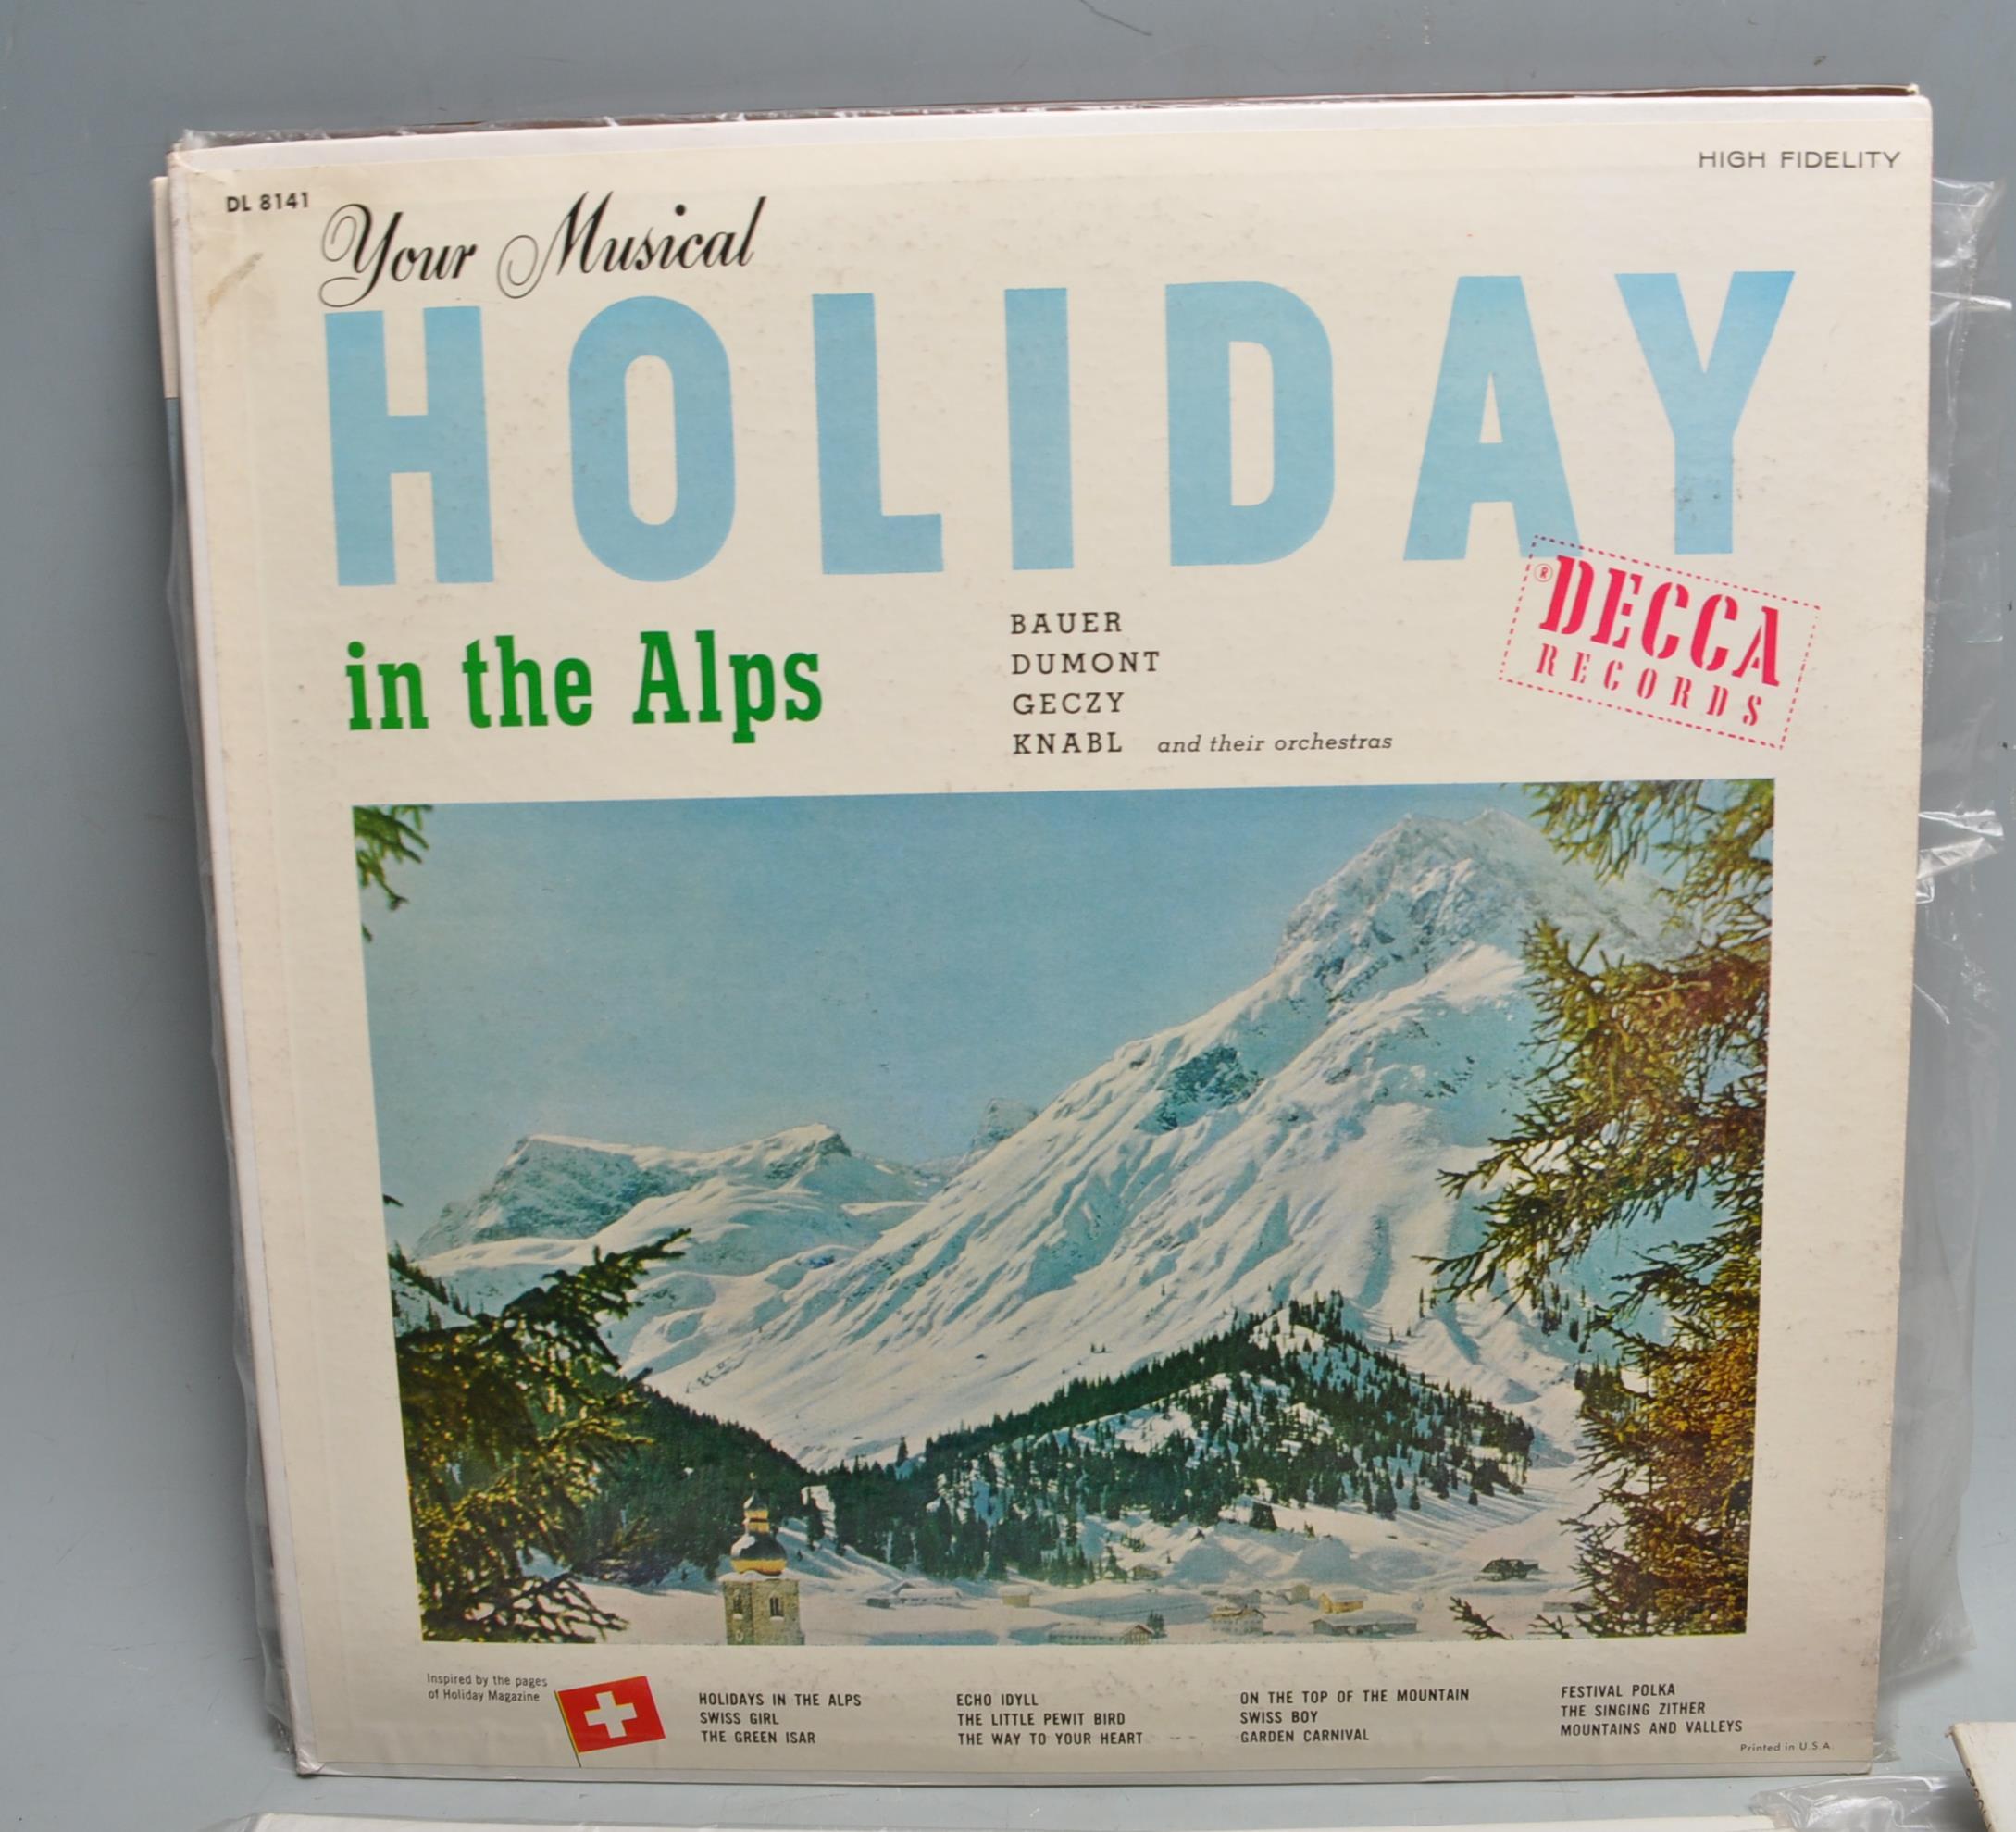 COLLECTION OF VINTAGE VINYL LP RECORDS - Image 6 of 7